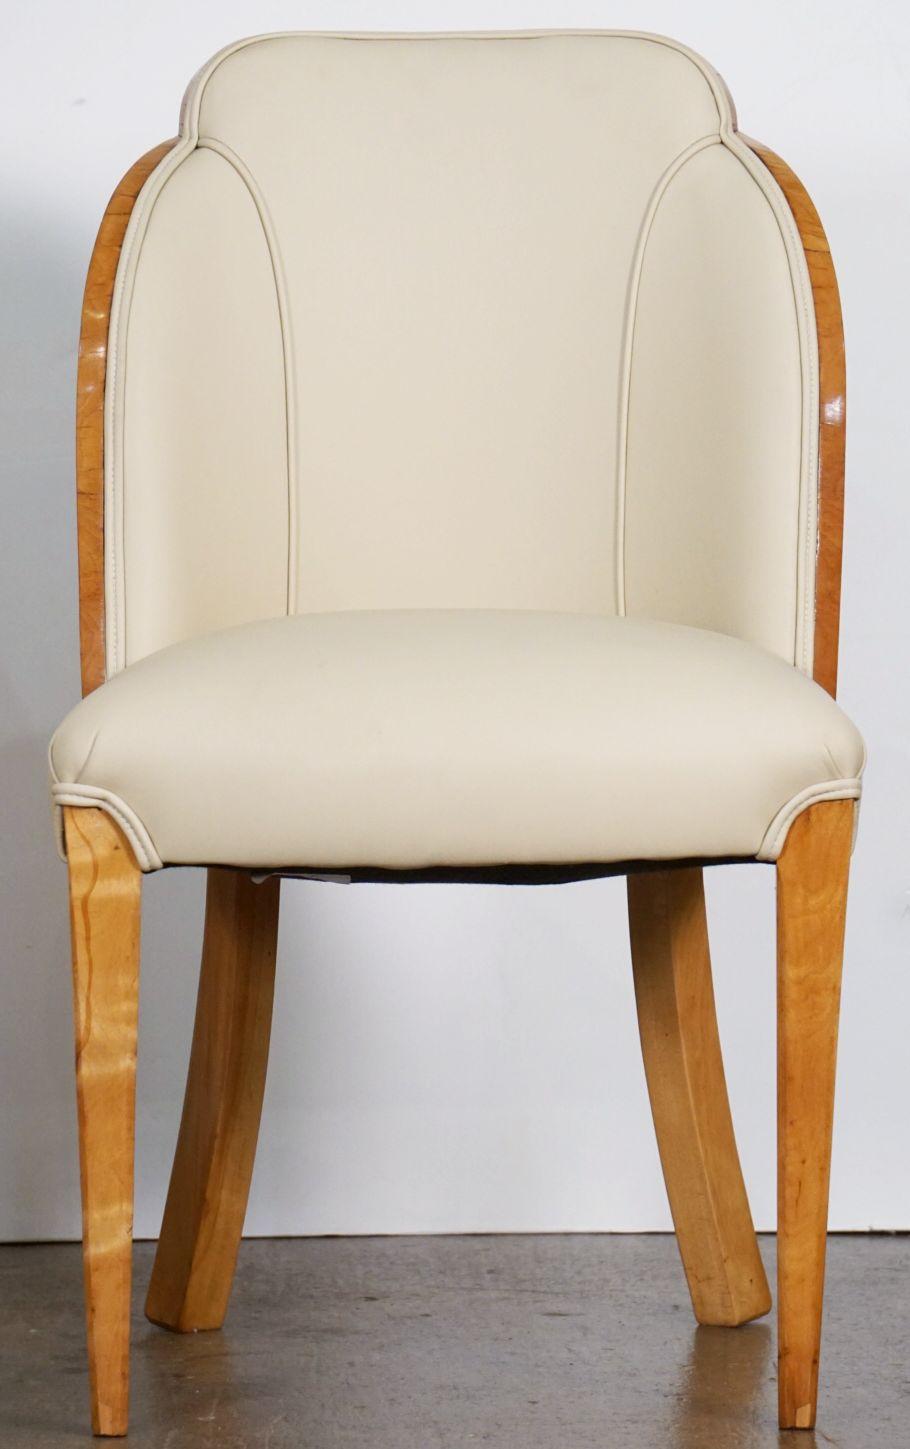 Art Deco Chairs of Burled Walnut and Leather Attributed to Harry and Lou Epstein In Good Condition For Sale In Austin, TX